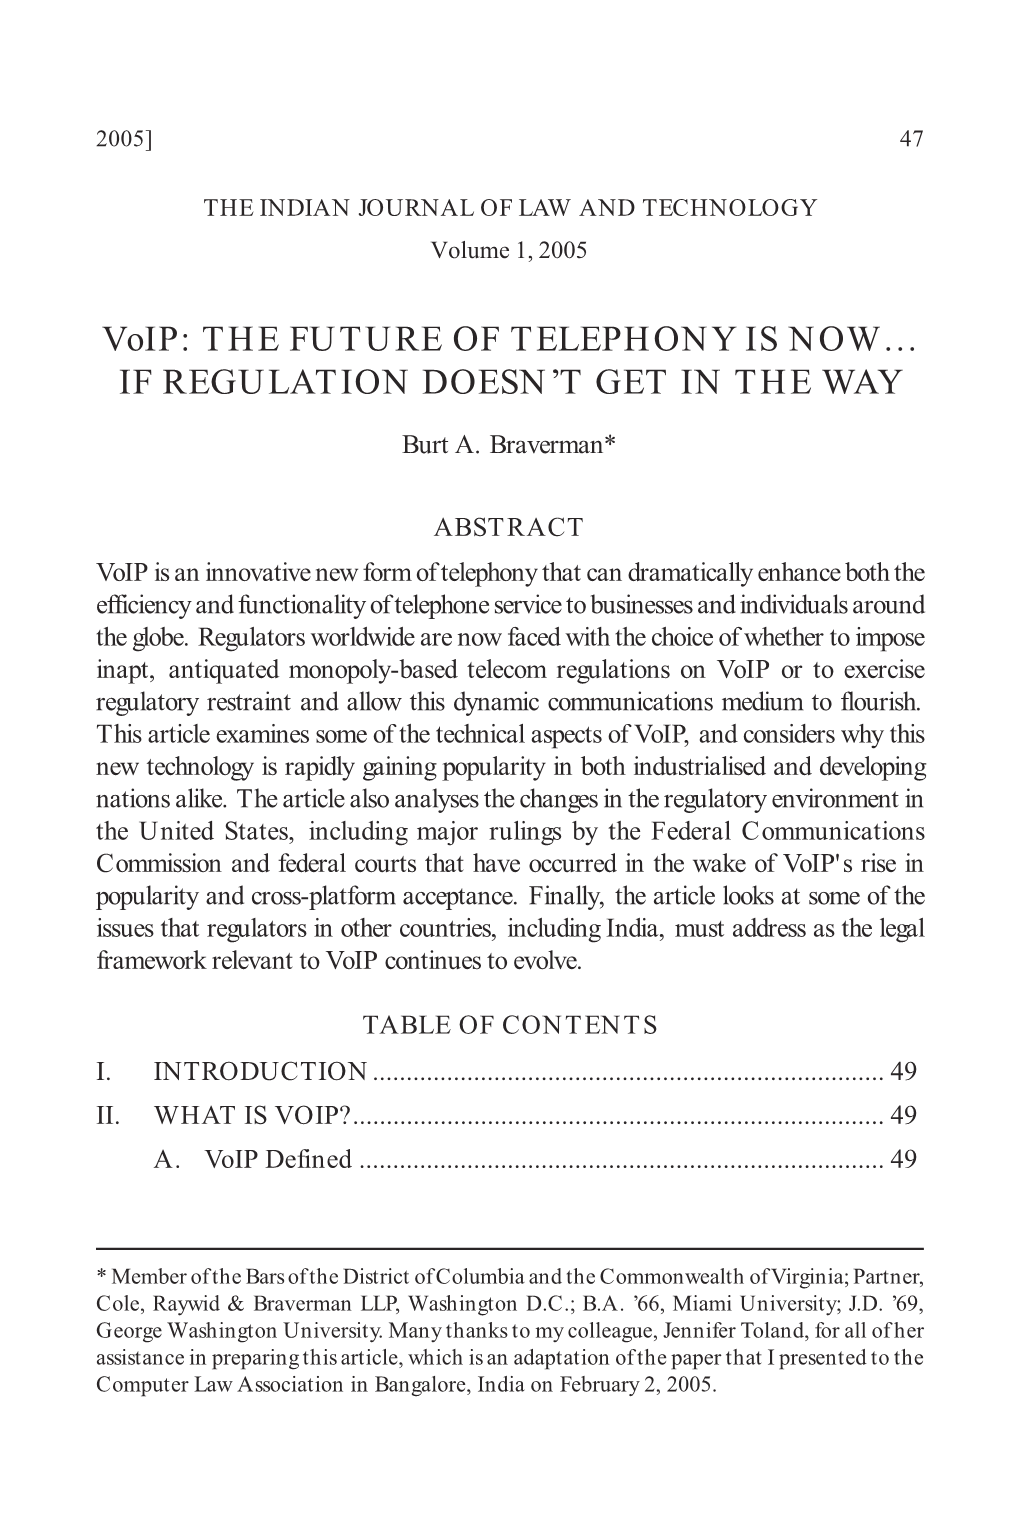 Voip: the FUTURE of TELEPHONY IS NOW… IF REGULATION DOESN’T GET in the WAY